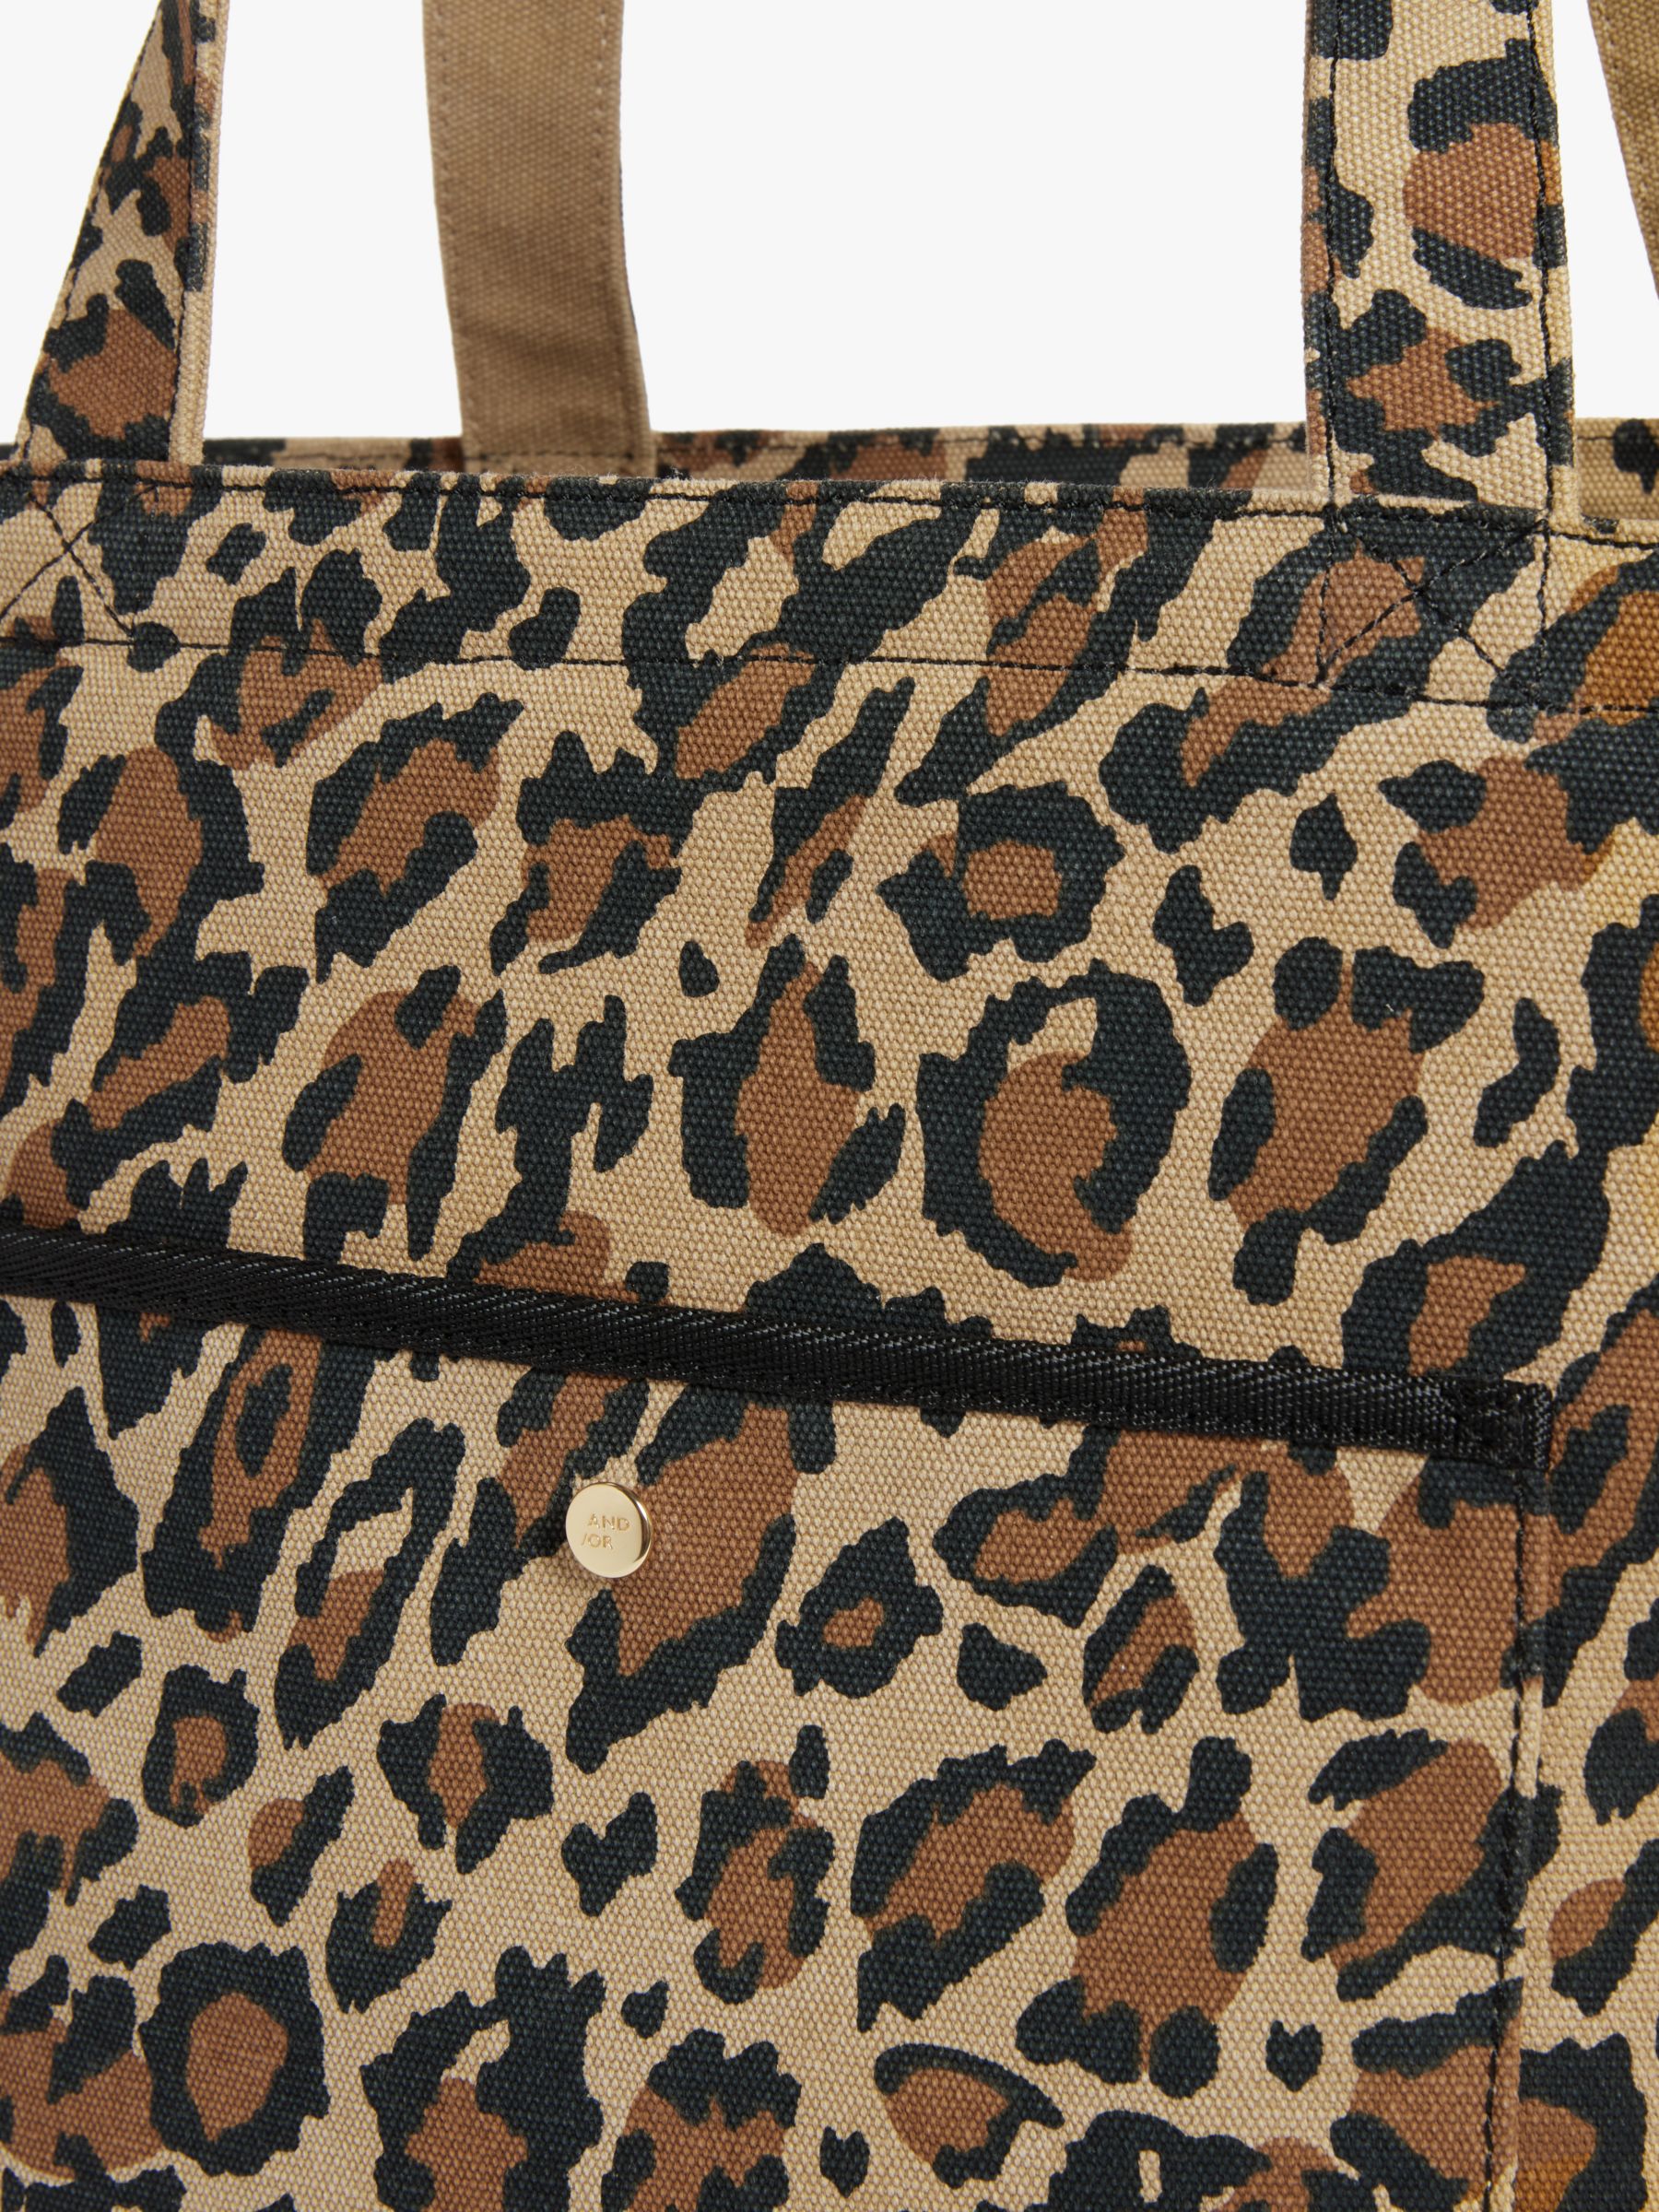 AND/OR Leopard Print East/West Canvas Tote Bag, Multi at John Lewis ...